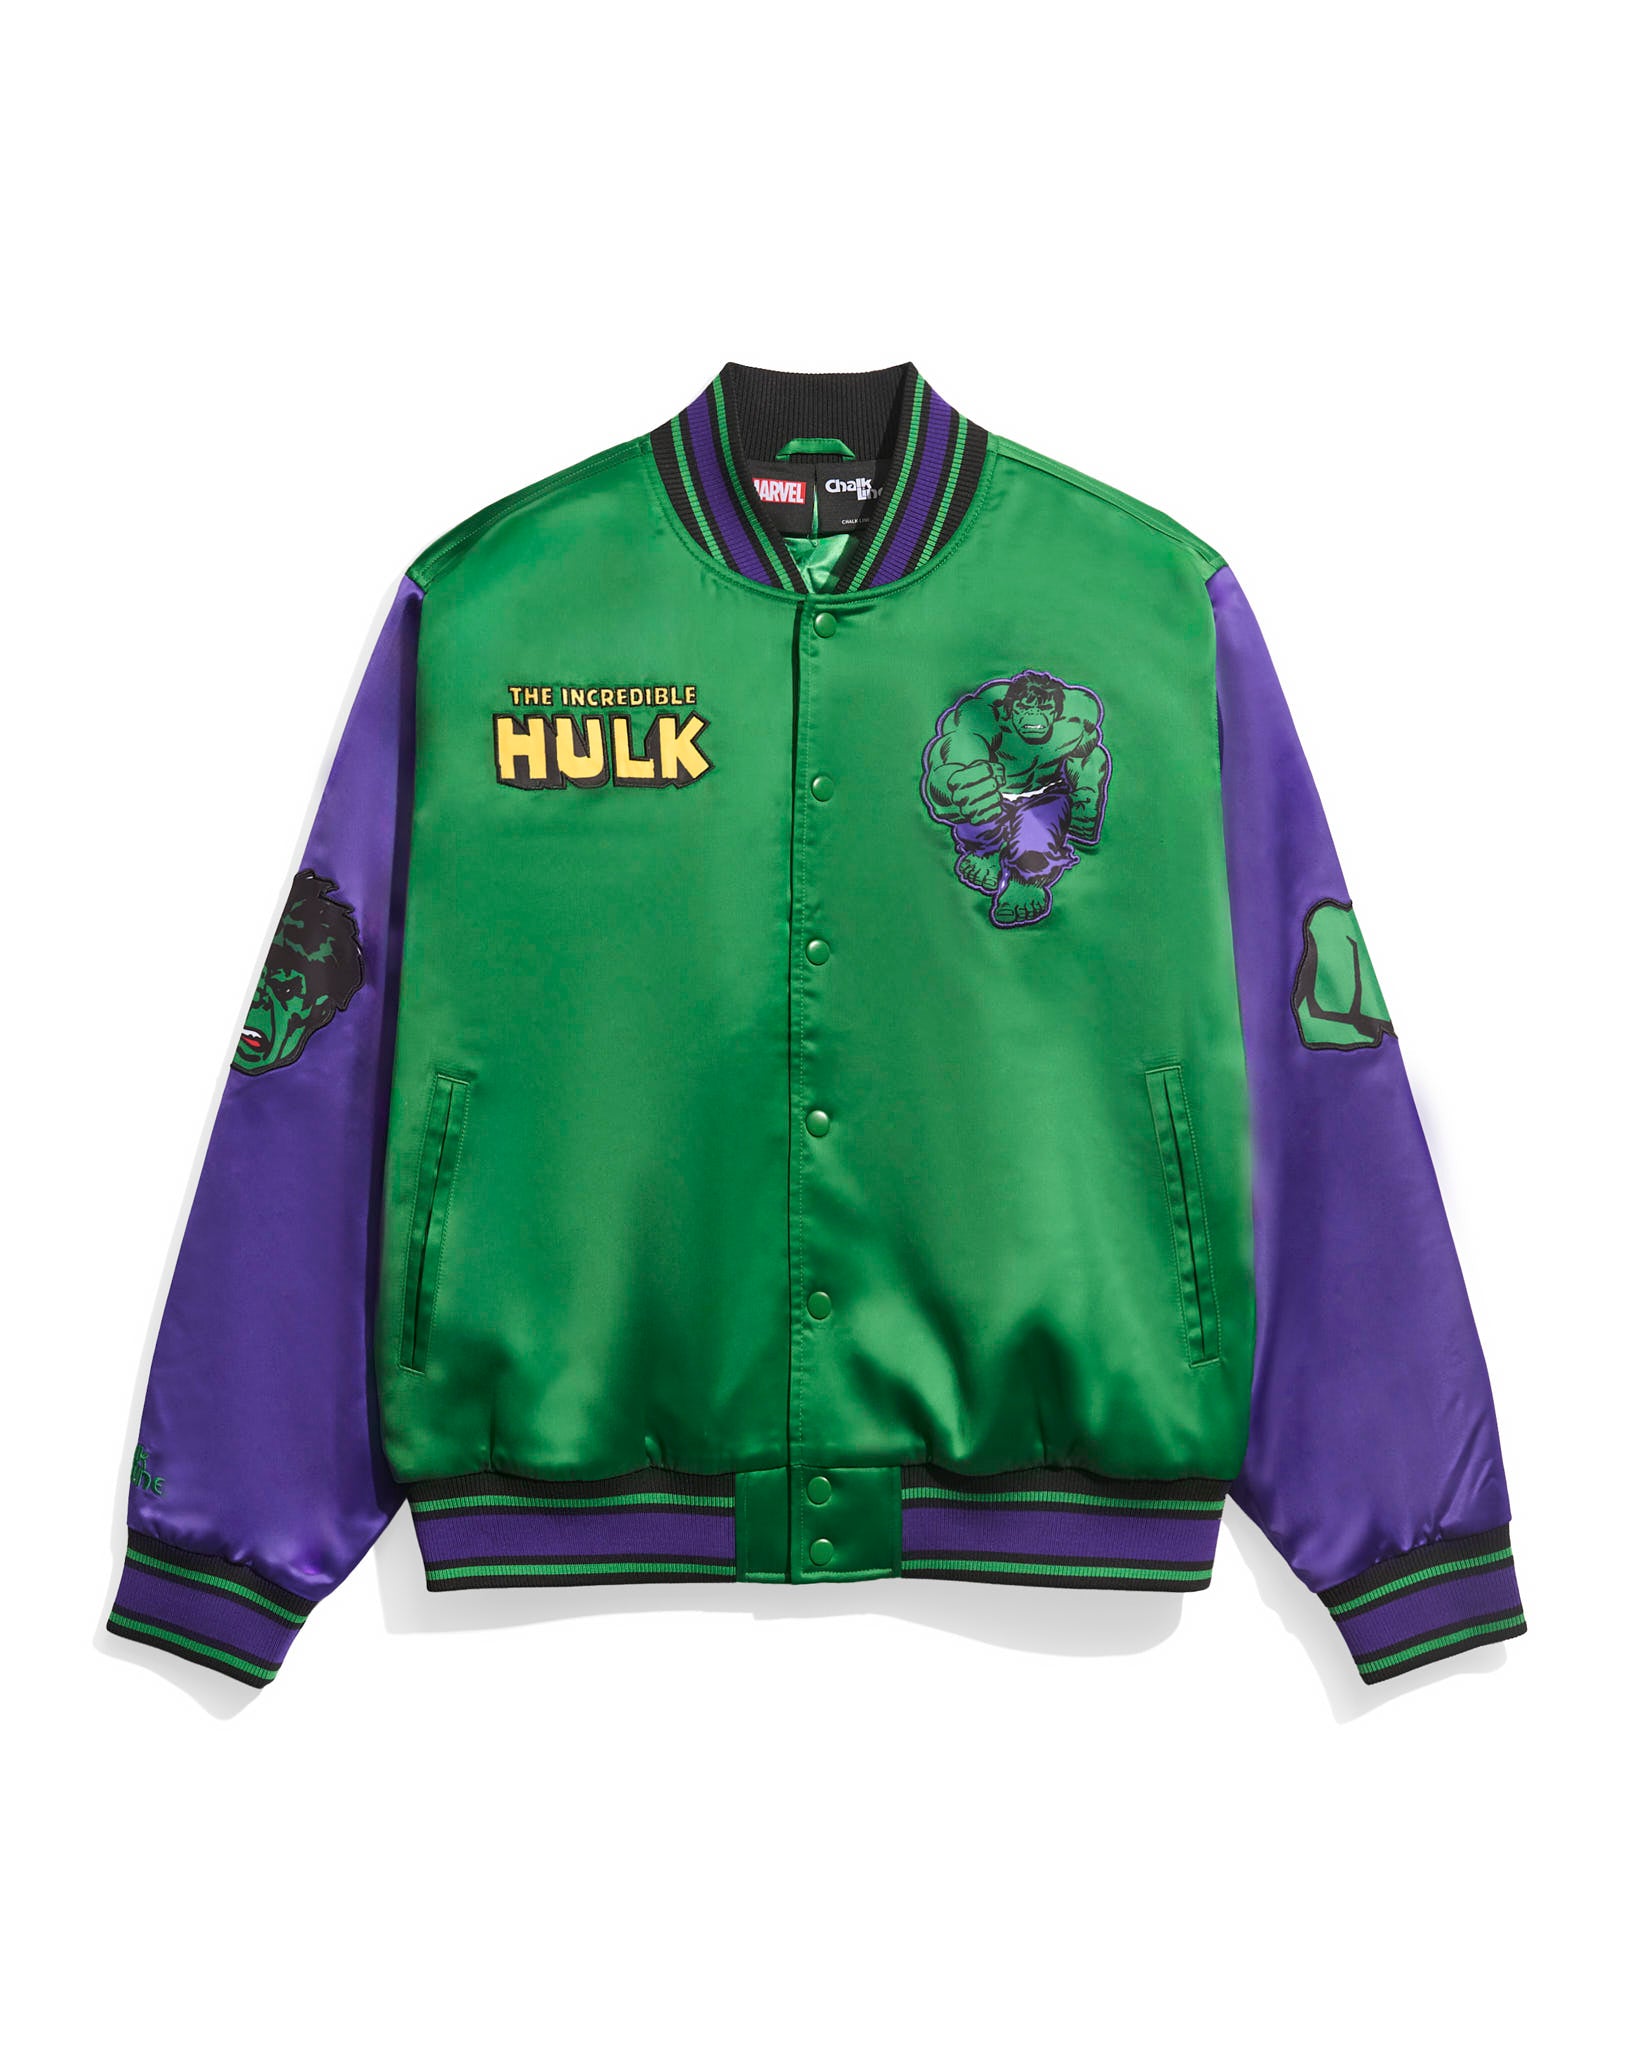 The Incredible Hulk Quilted Satin Jacket